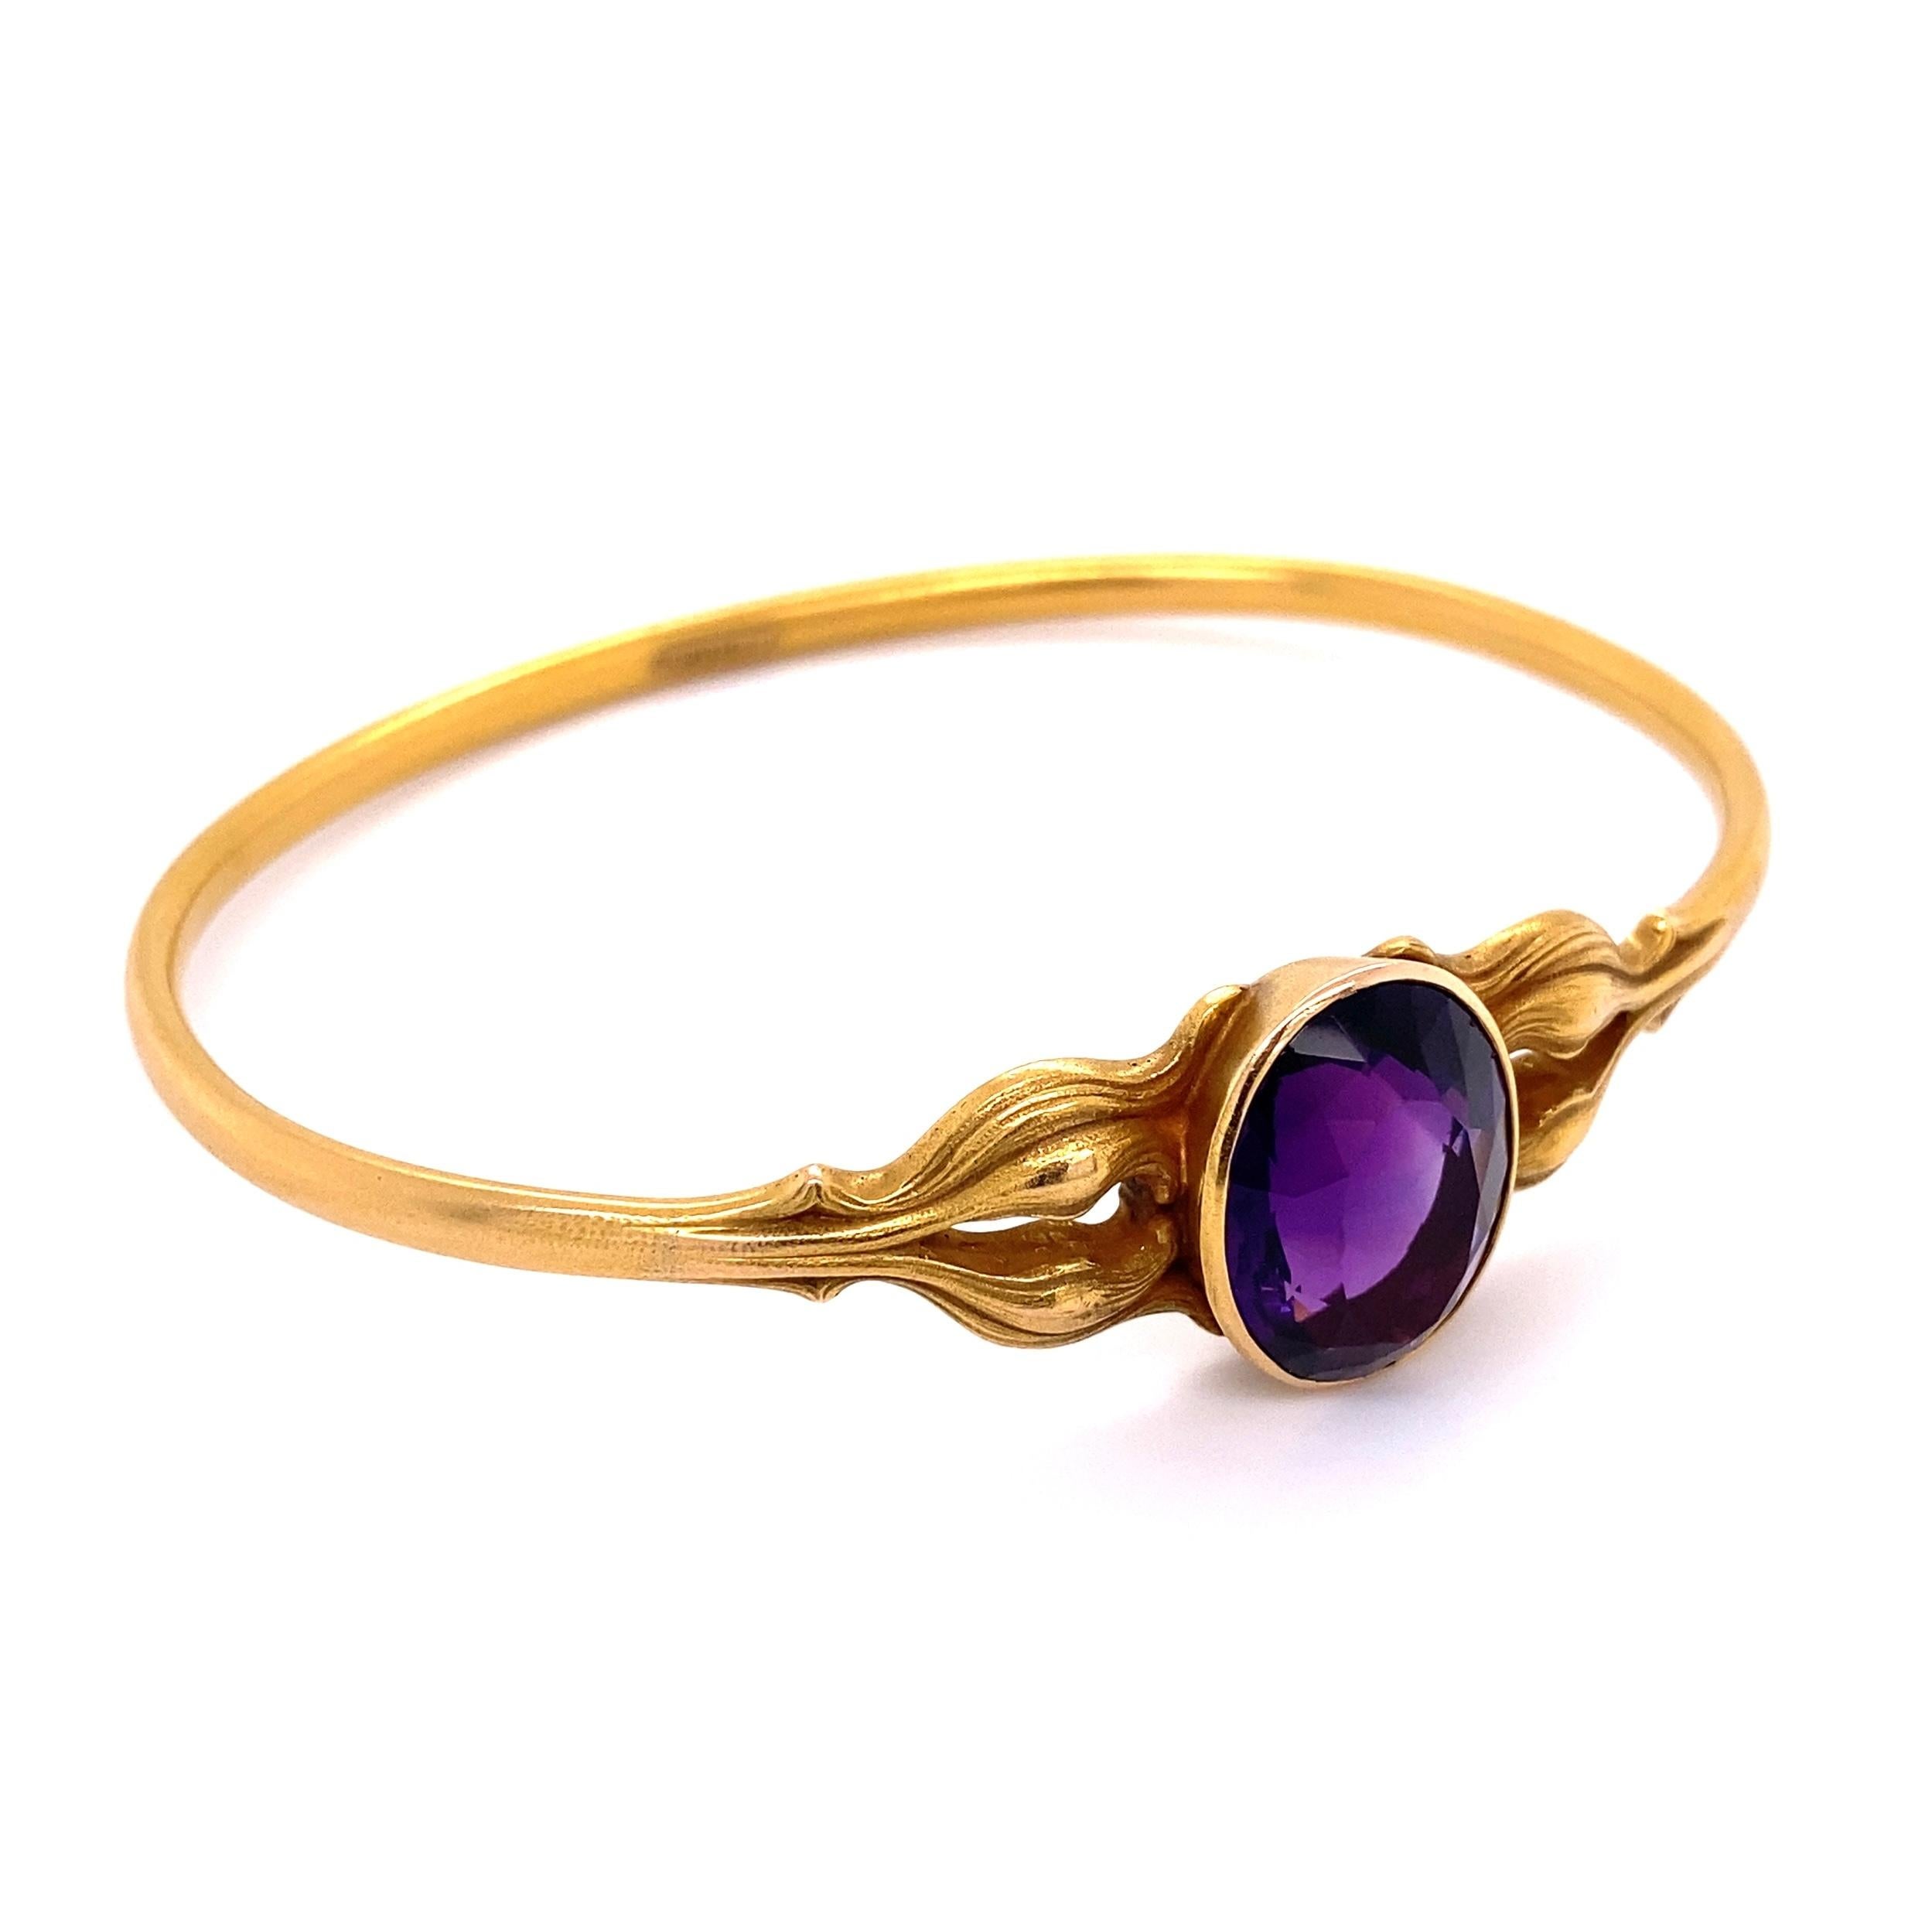 Simply Beautiful and Stylish Edwardian Shreve & Co Hand crafted Gold Bangle Bracelet, center securely set with an Amethyst and accented on either side with decorative designs. Hand crafted in 14 Karat yellow Gold. Marked SHREVE & CO 14K and